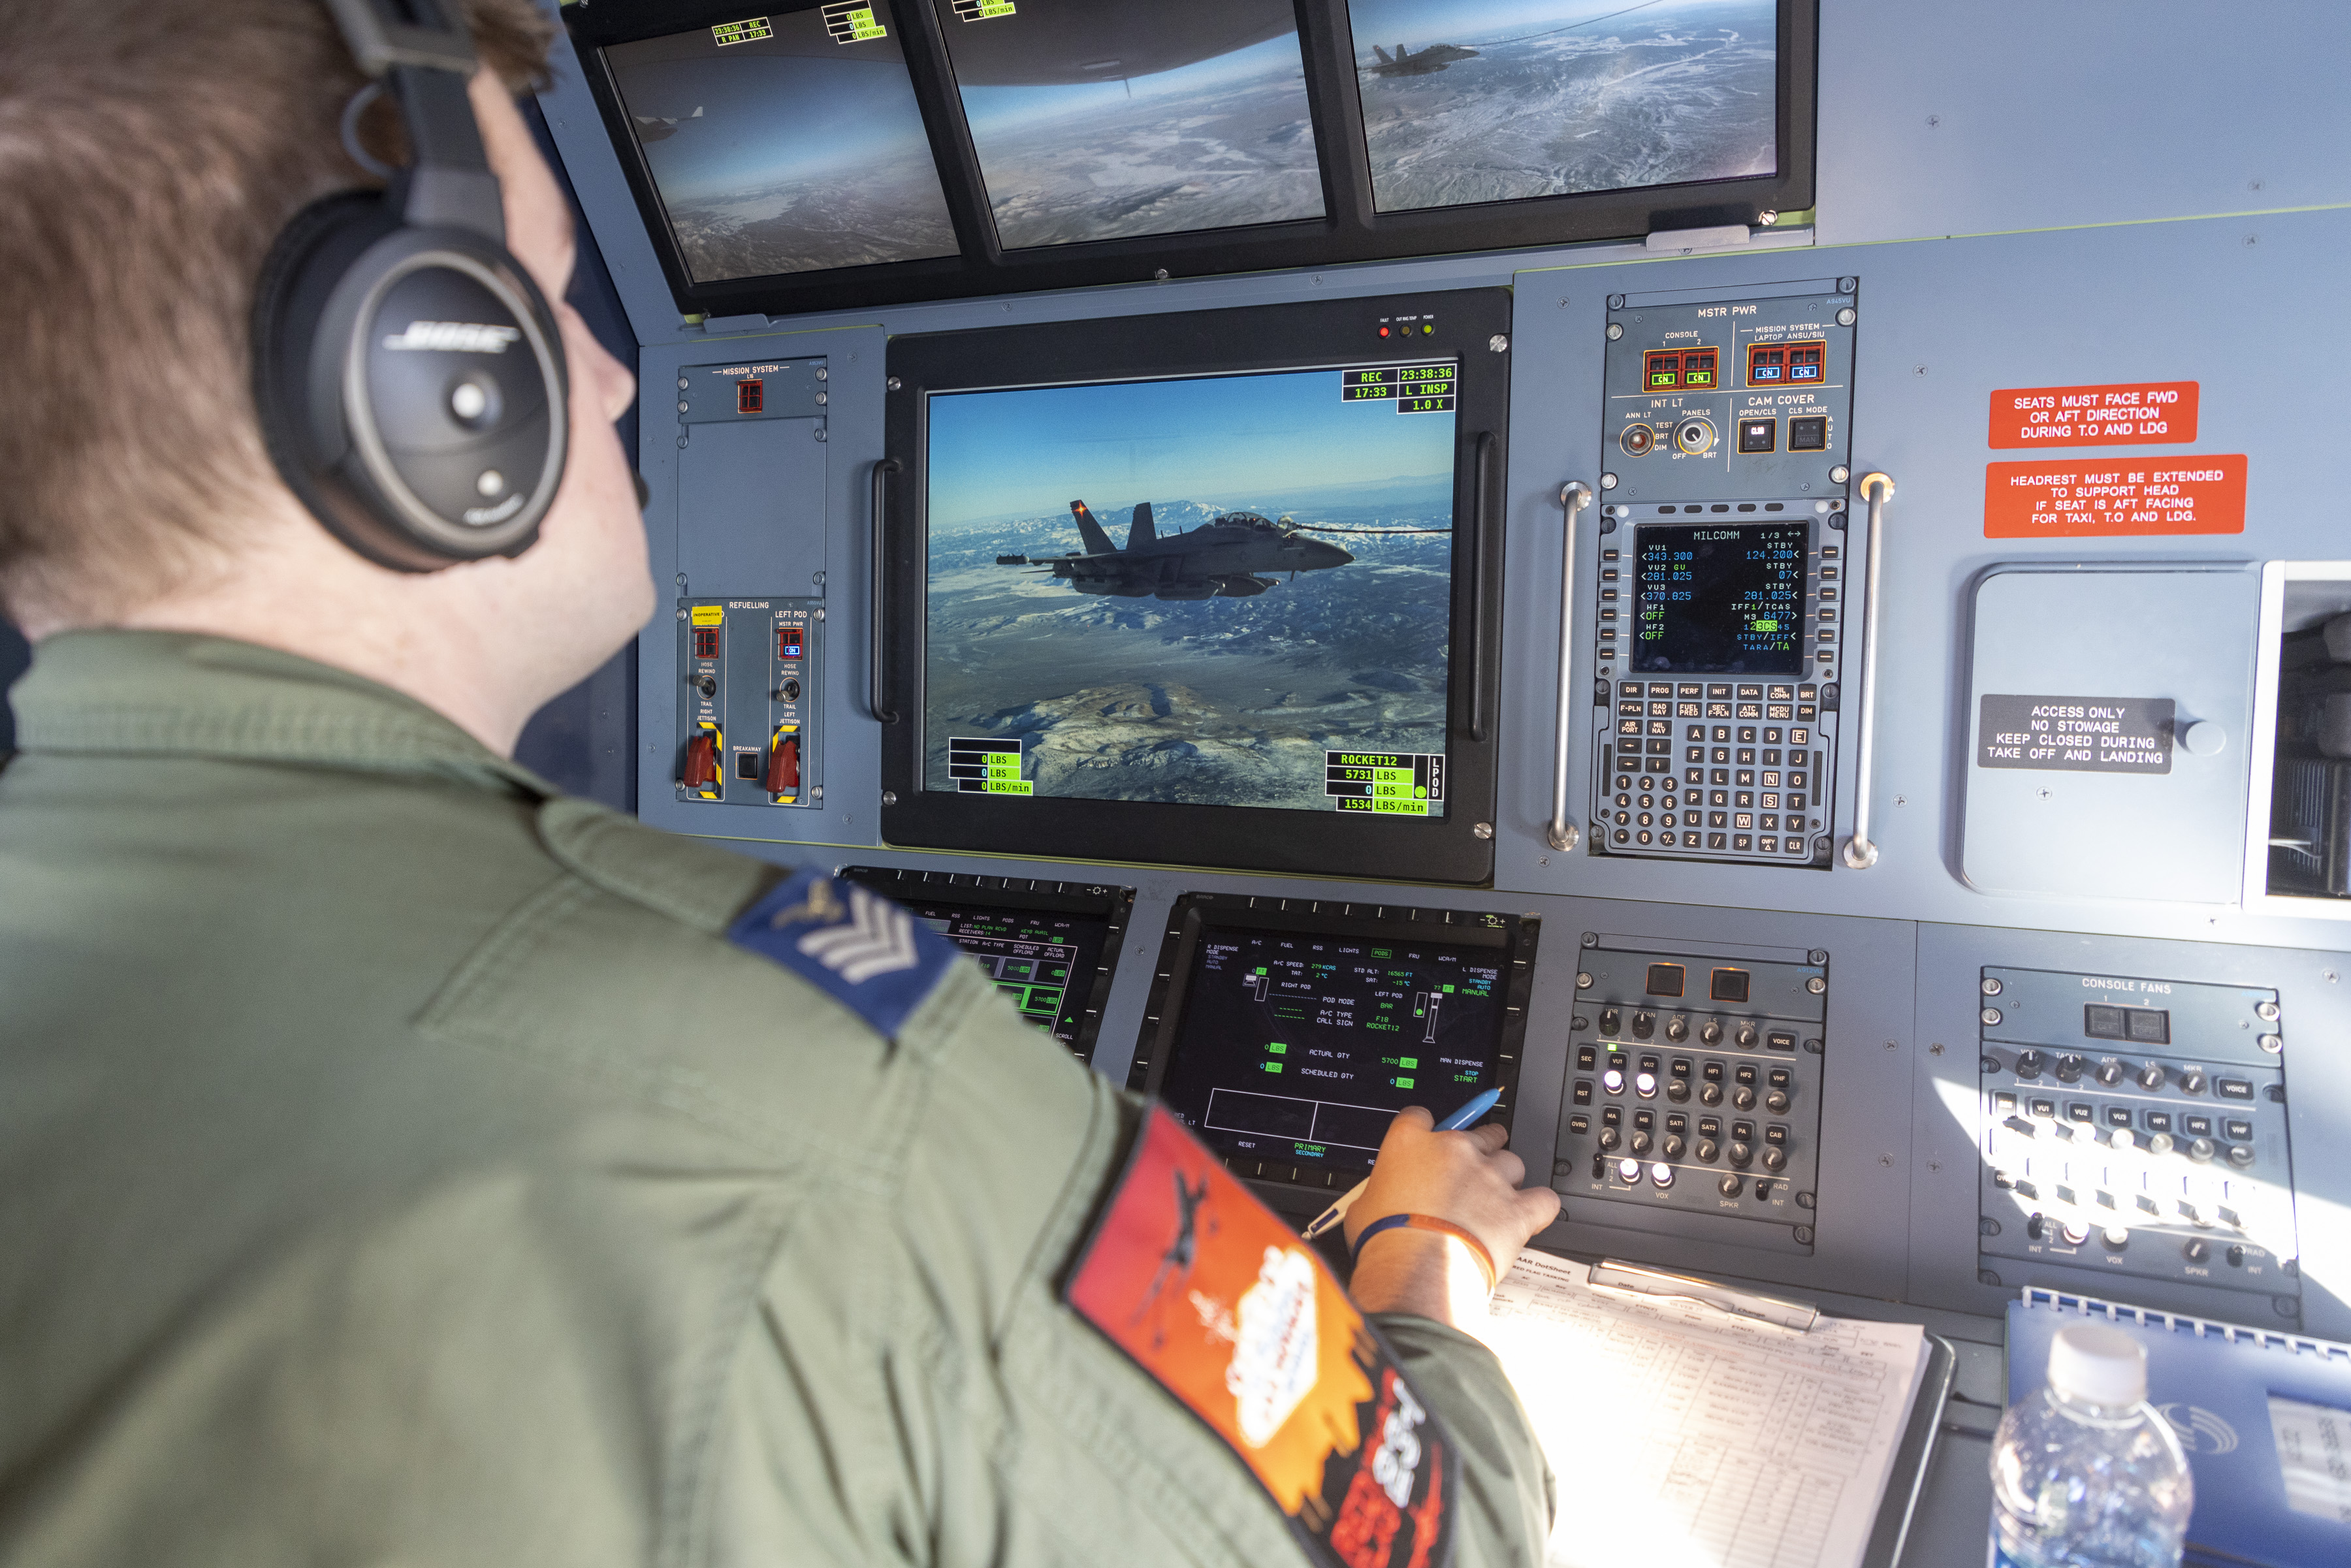 Image shows RAF aviator using monitor to refuel aircraft in flight.